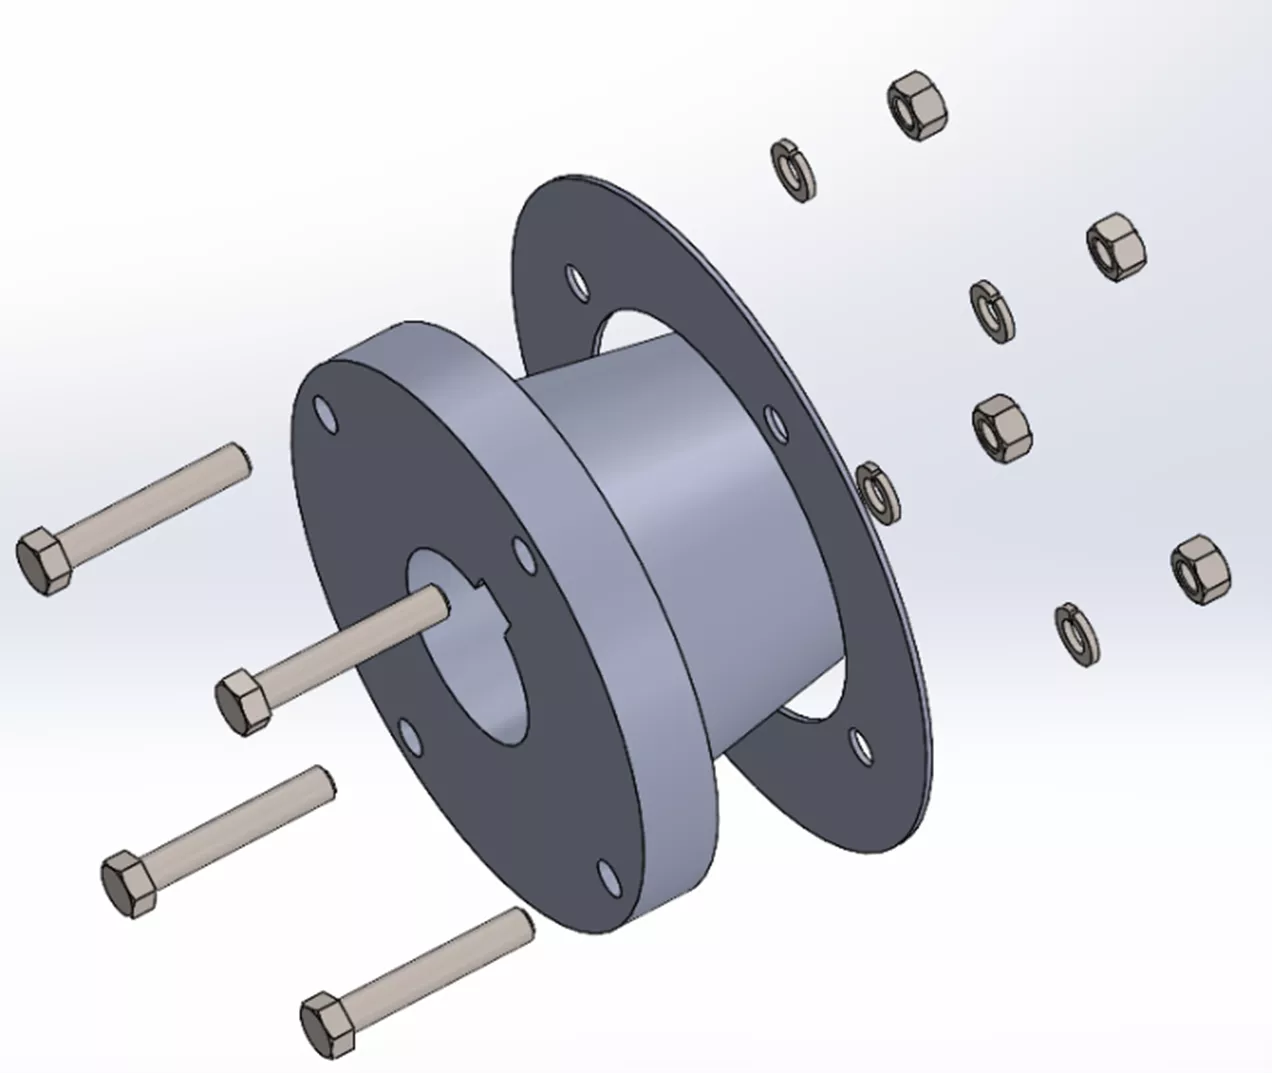 Save Time with SOLIDWORKS Smart Components